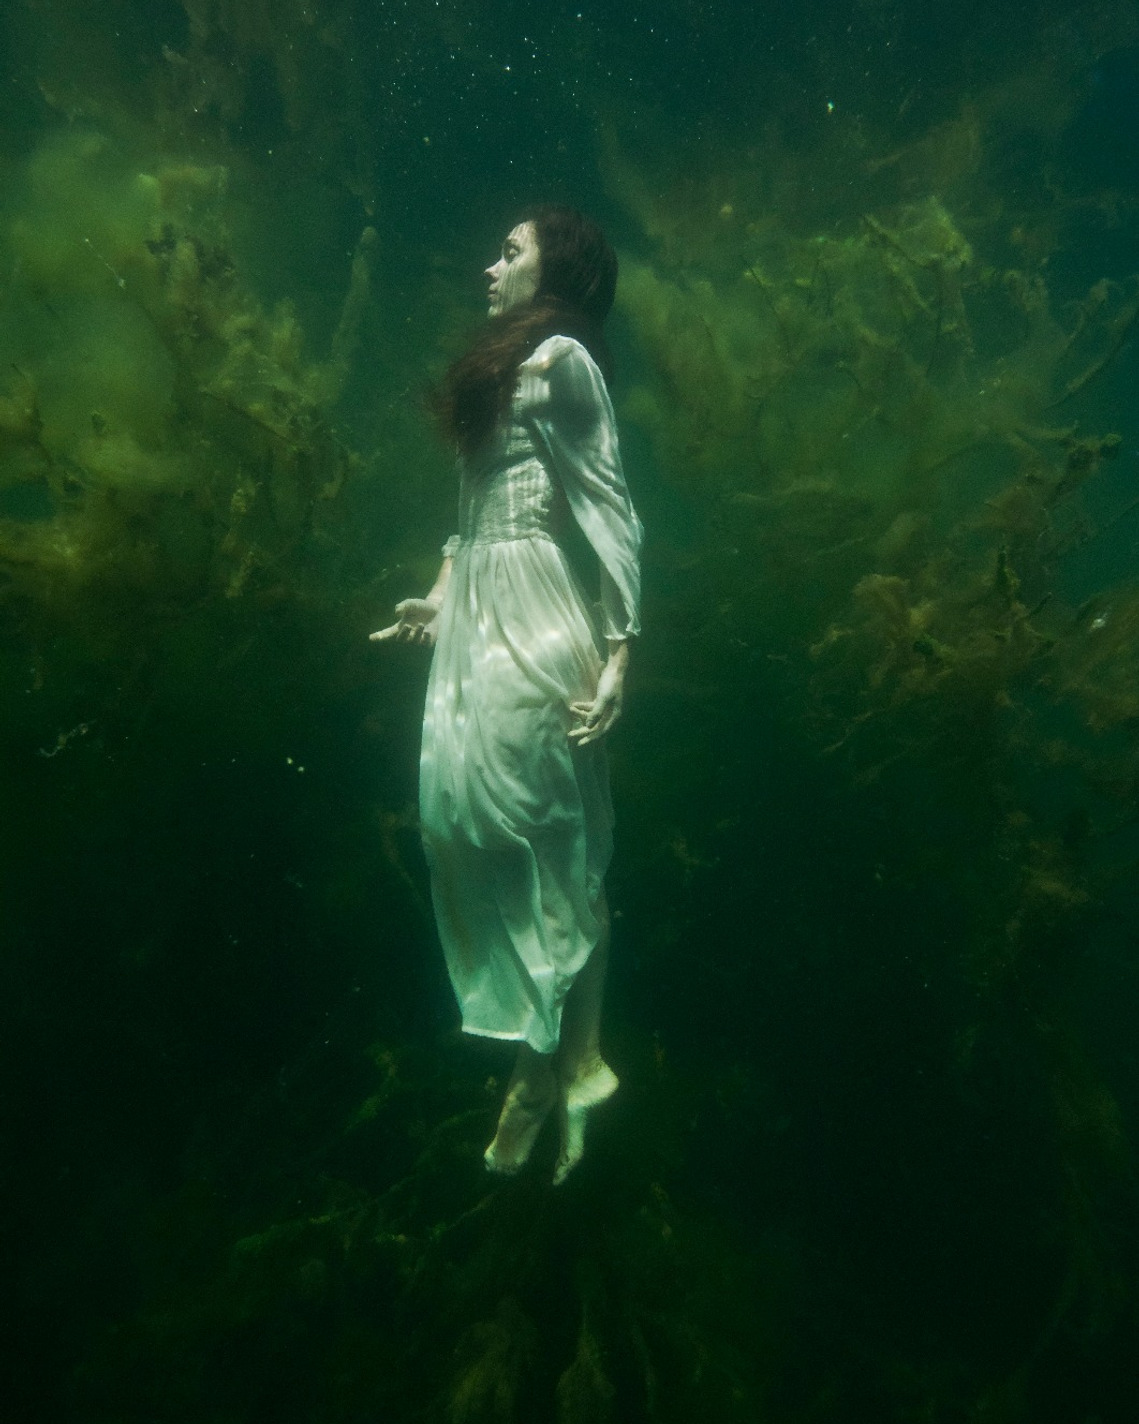 Full body underwater shot of underwater performance specialist Anima May, Lychen natural lake, Germany